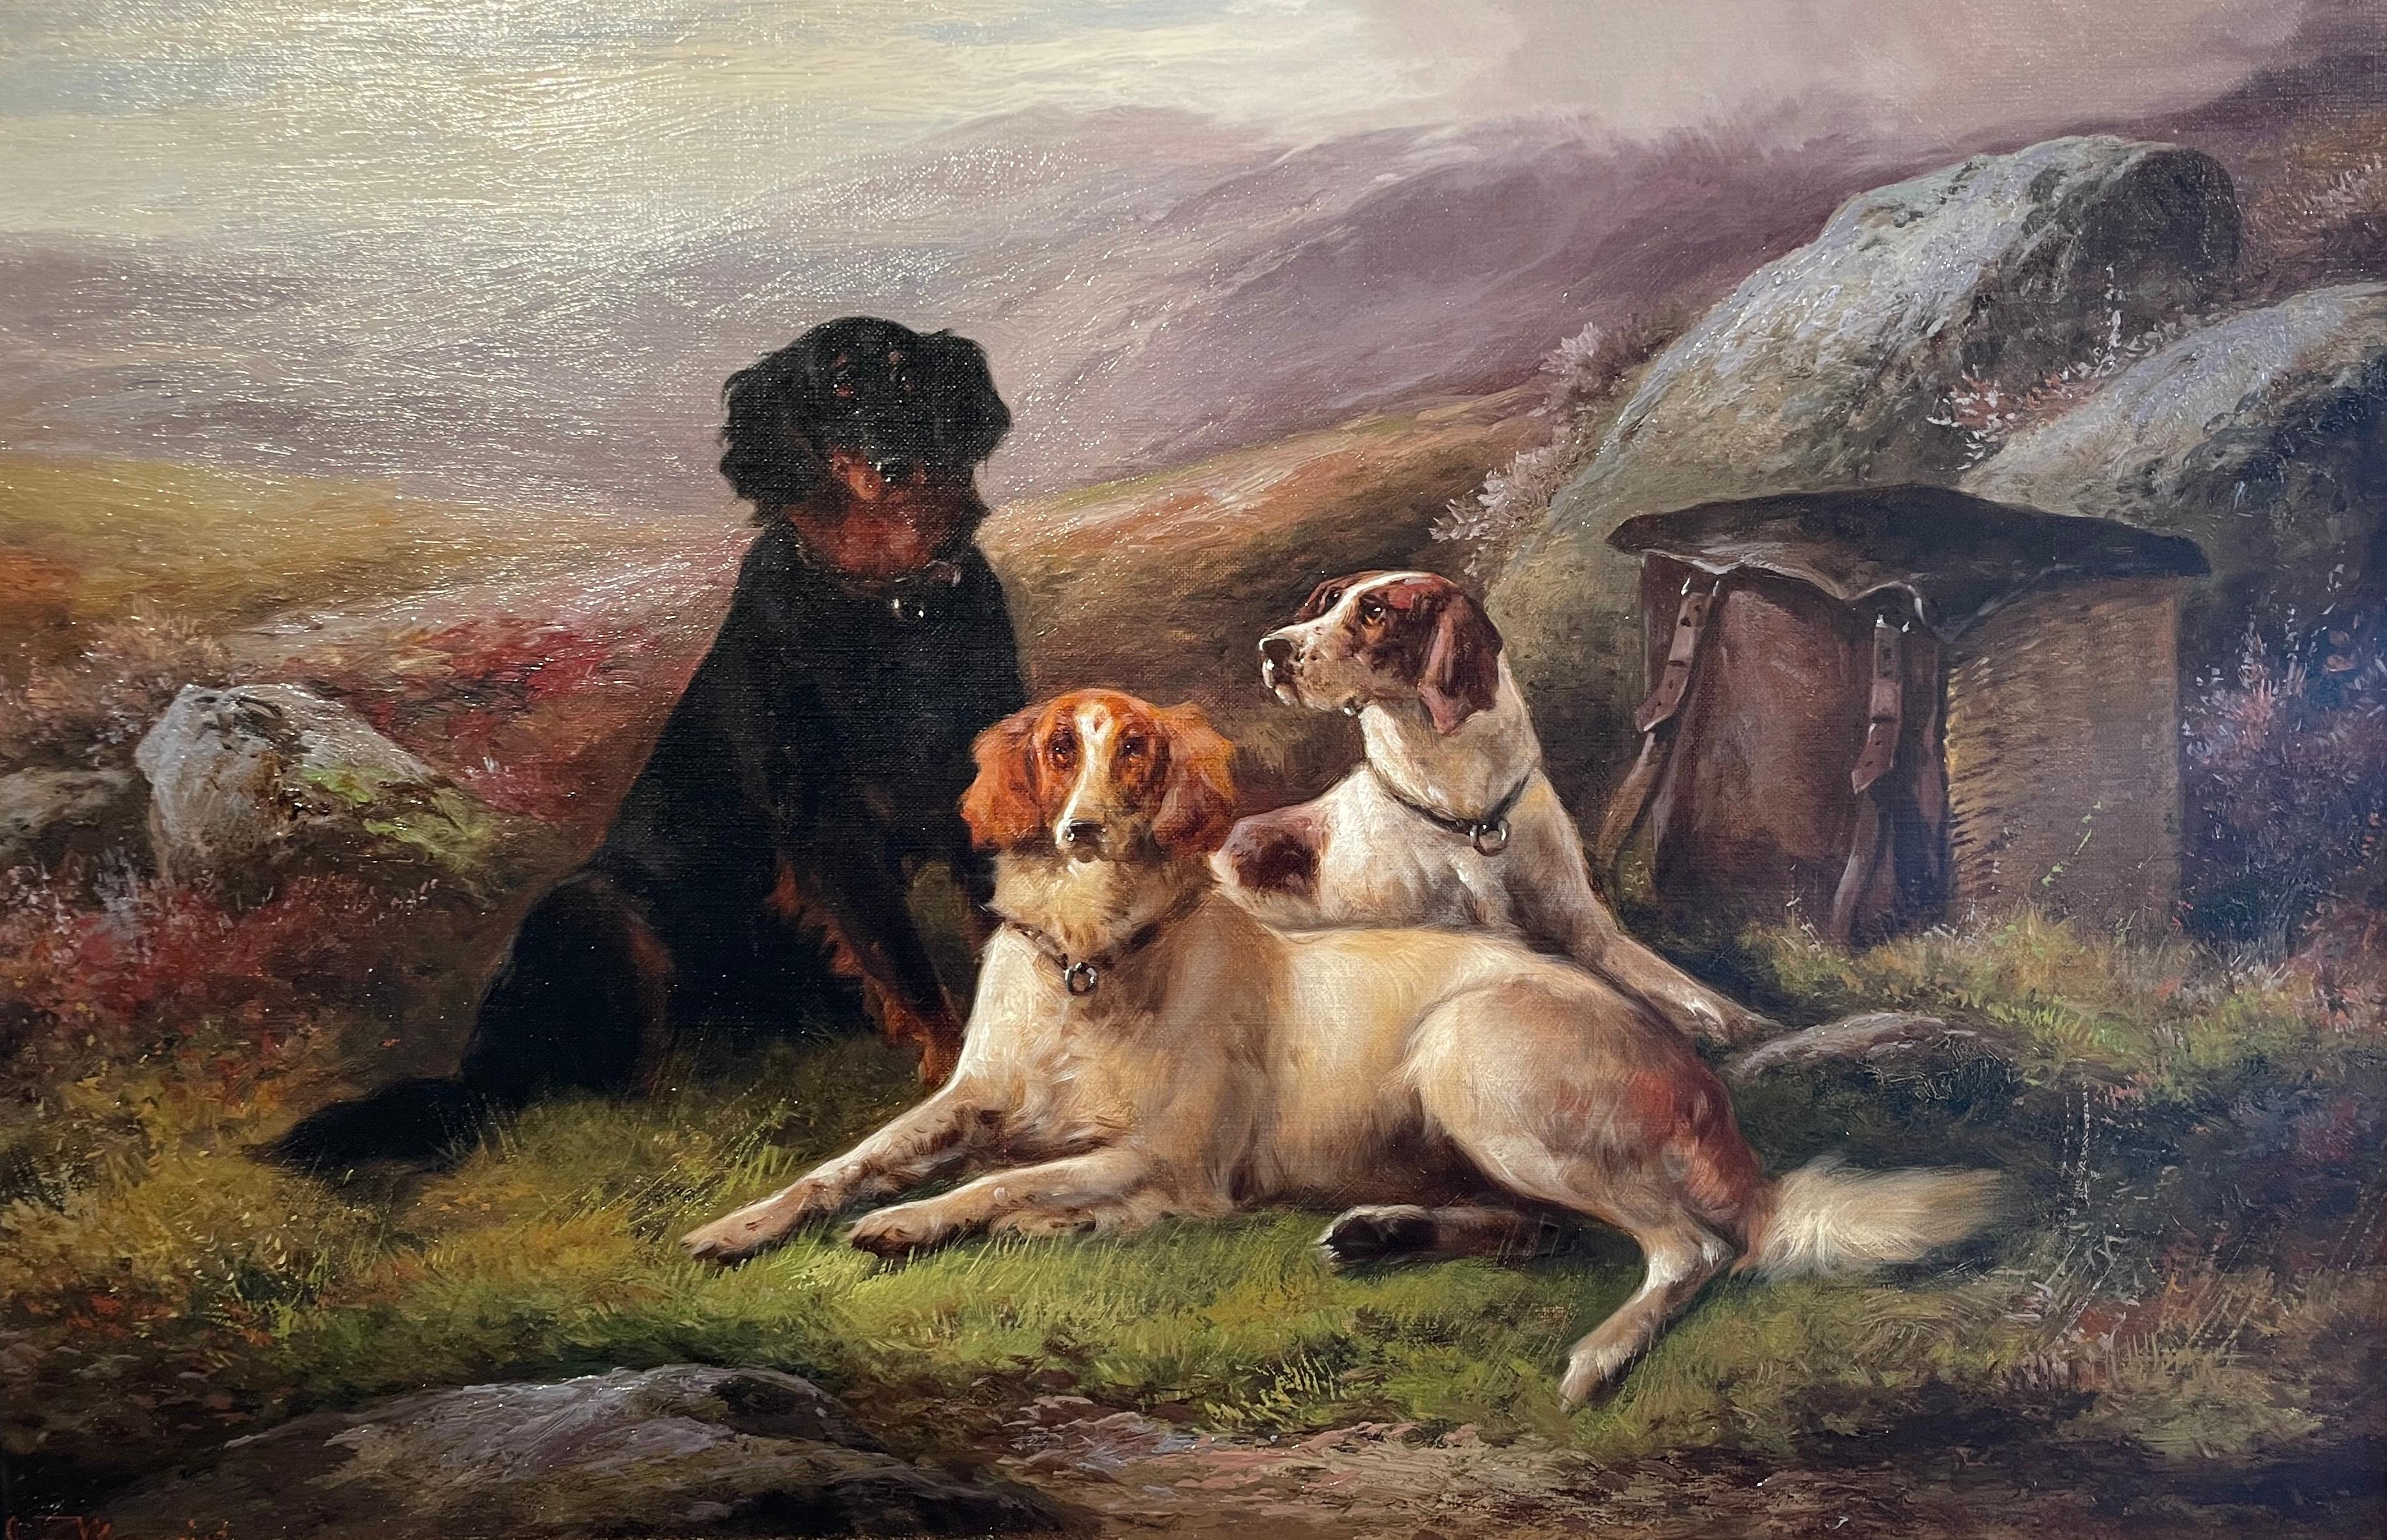 This exquisite pair of 19th century painting by John W. Morris (1865-1924) features dogs in a British Green landscape after a days hunting. The dogs are painted with the upmost detail, showing their beautiful coats glistening in the afternoon light.